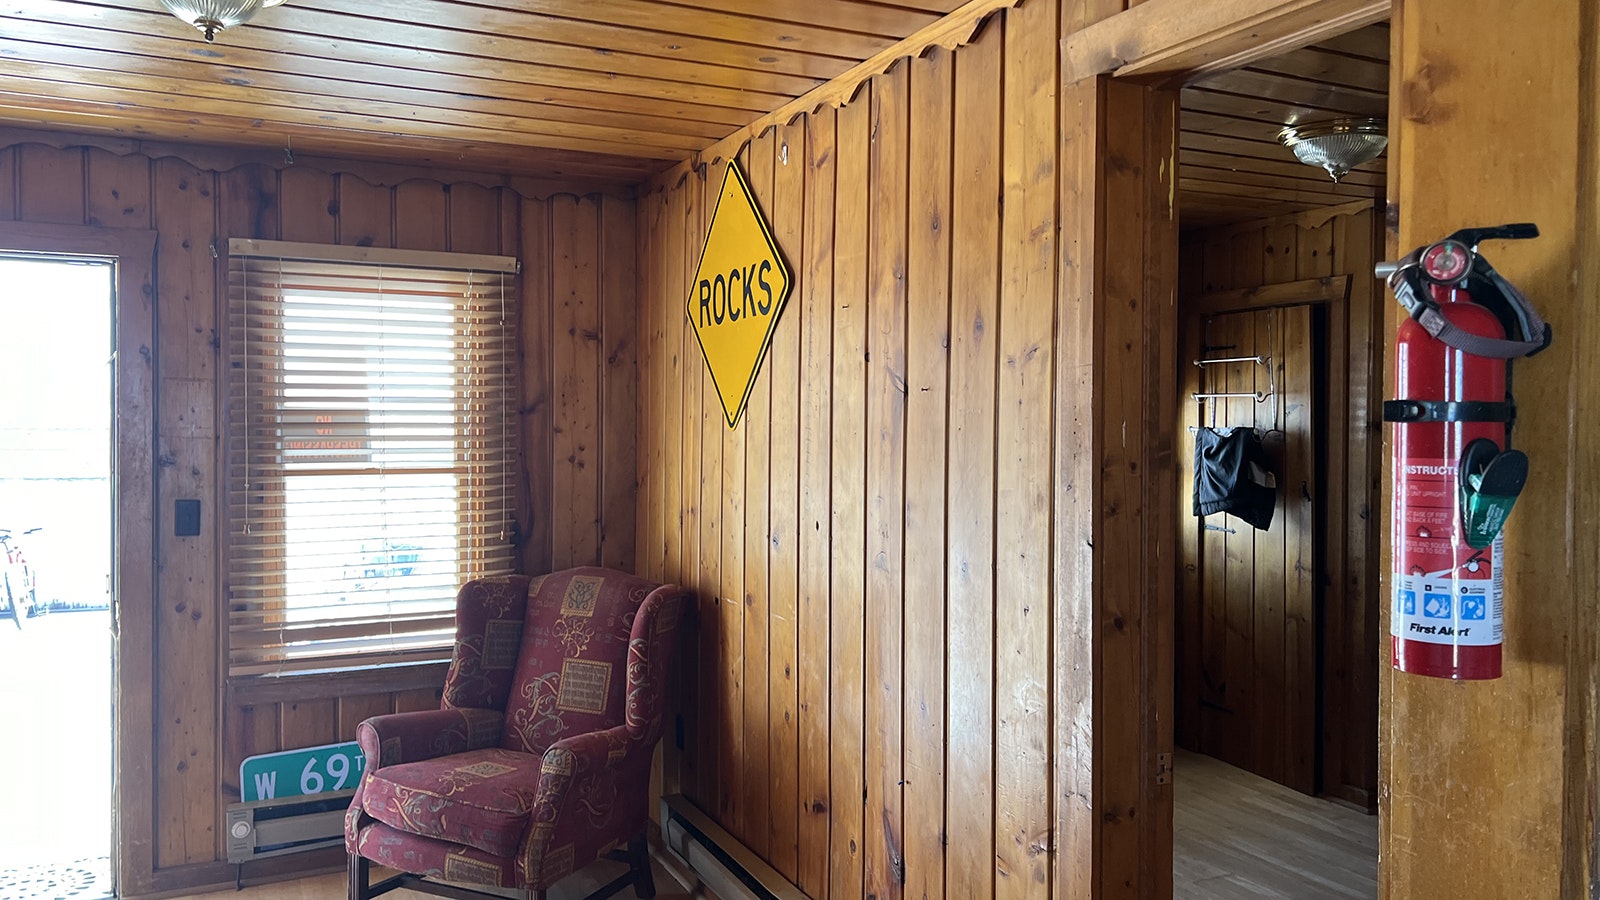 The “Cowboy Joe Suite” is one of three units in a mini-motel included with the Holliday House property west of Laramie. The entire property is for sale for $525,000.